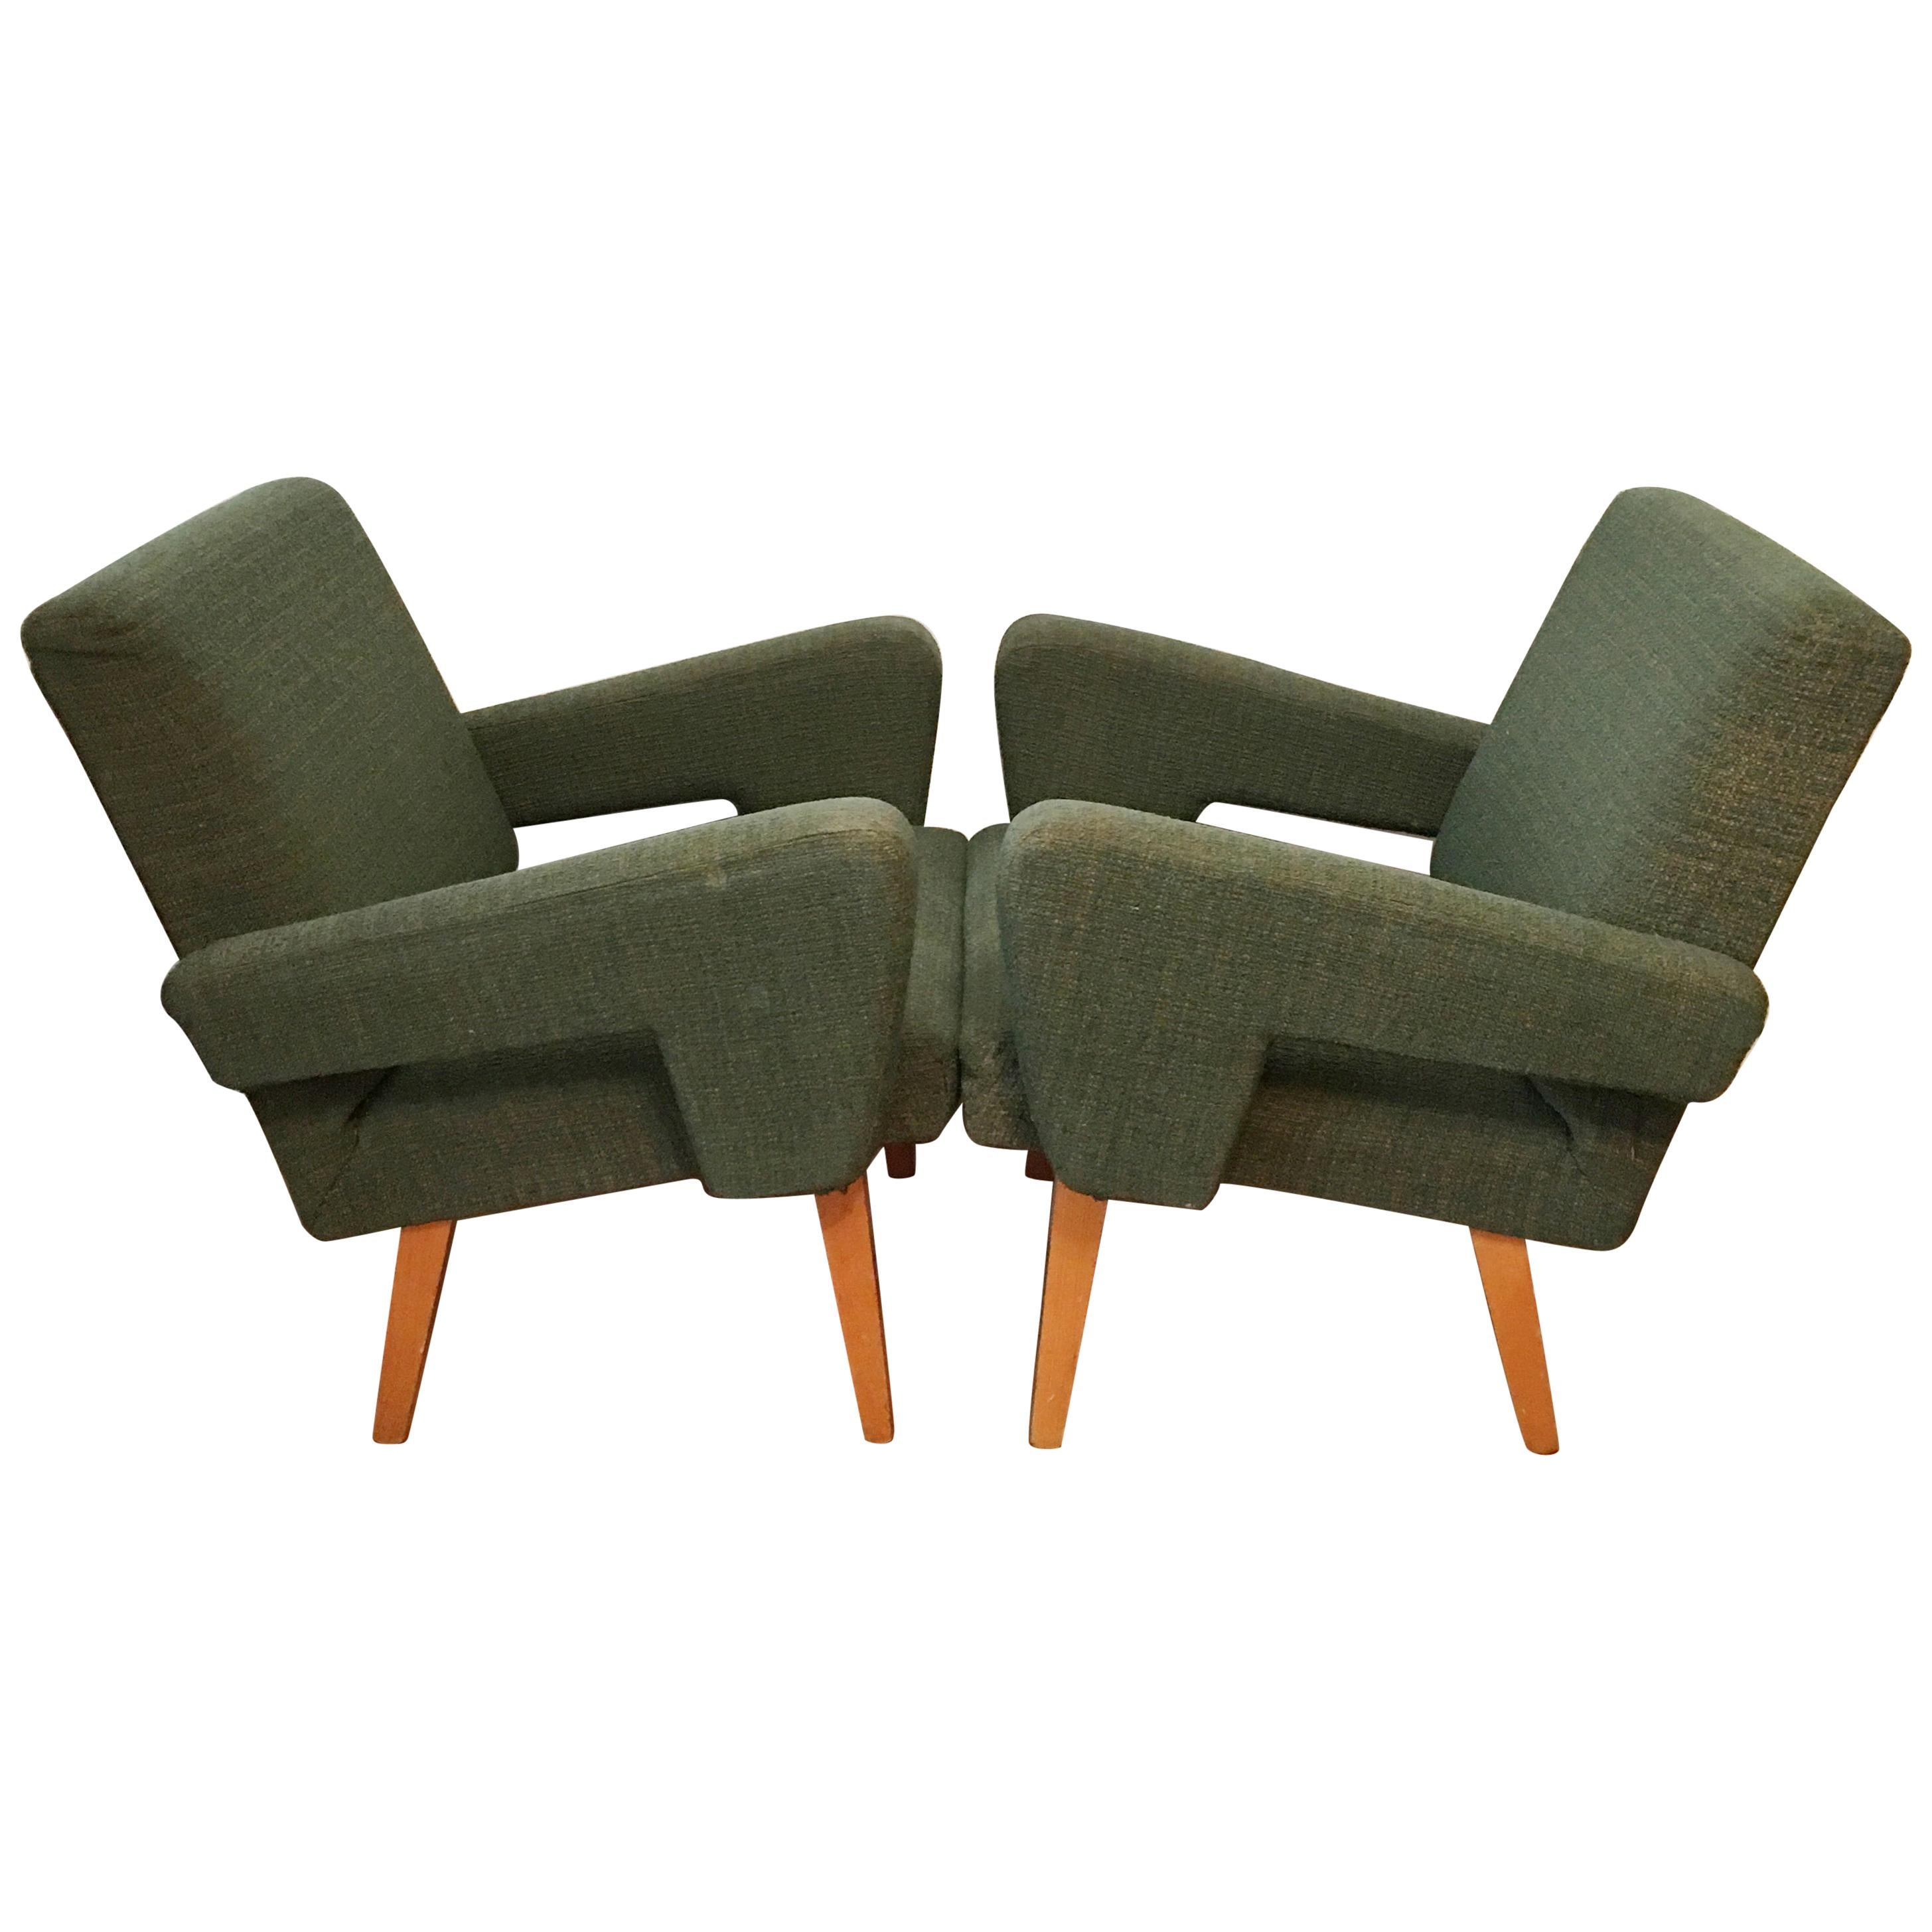 Green Vintage Rocket Armchairs by Jitona, 1960s, Pair For Sale